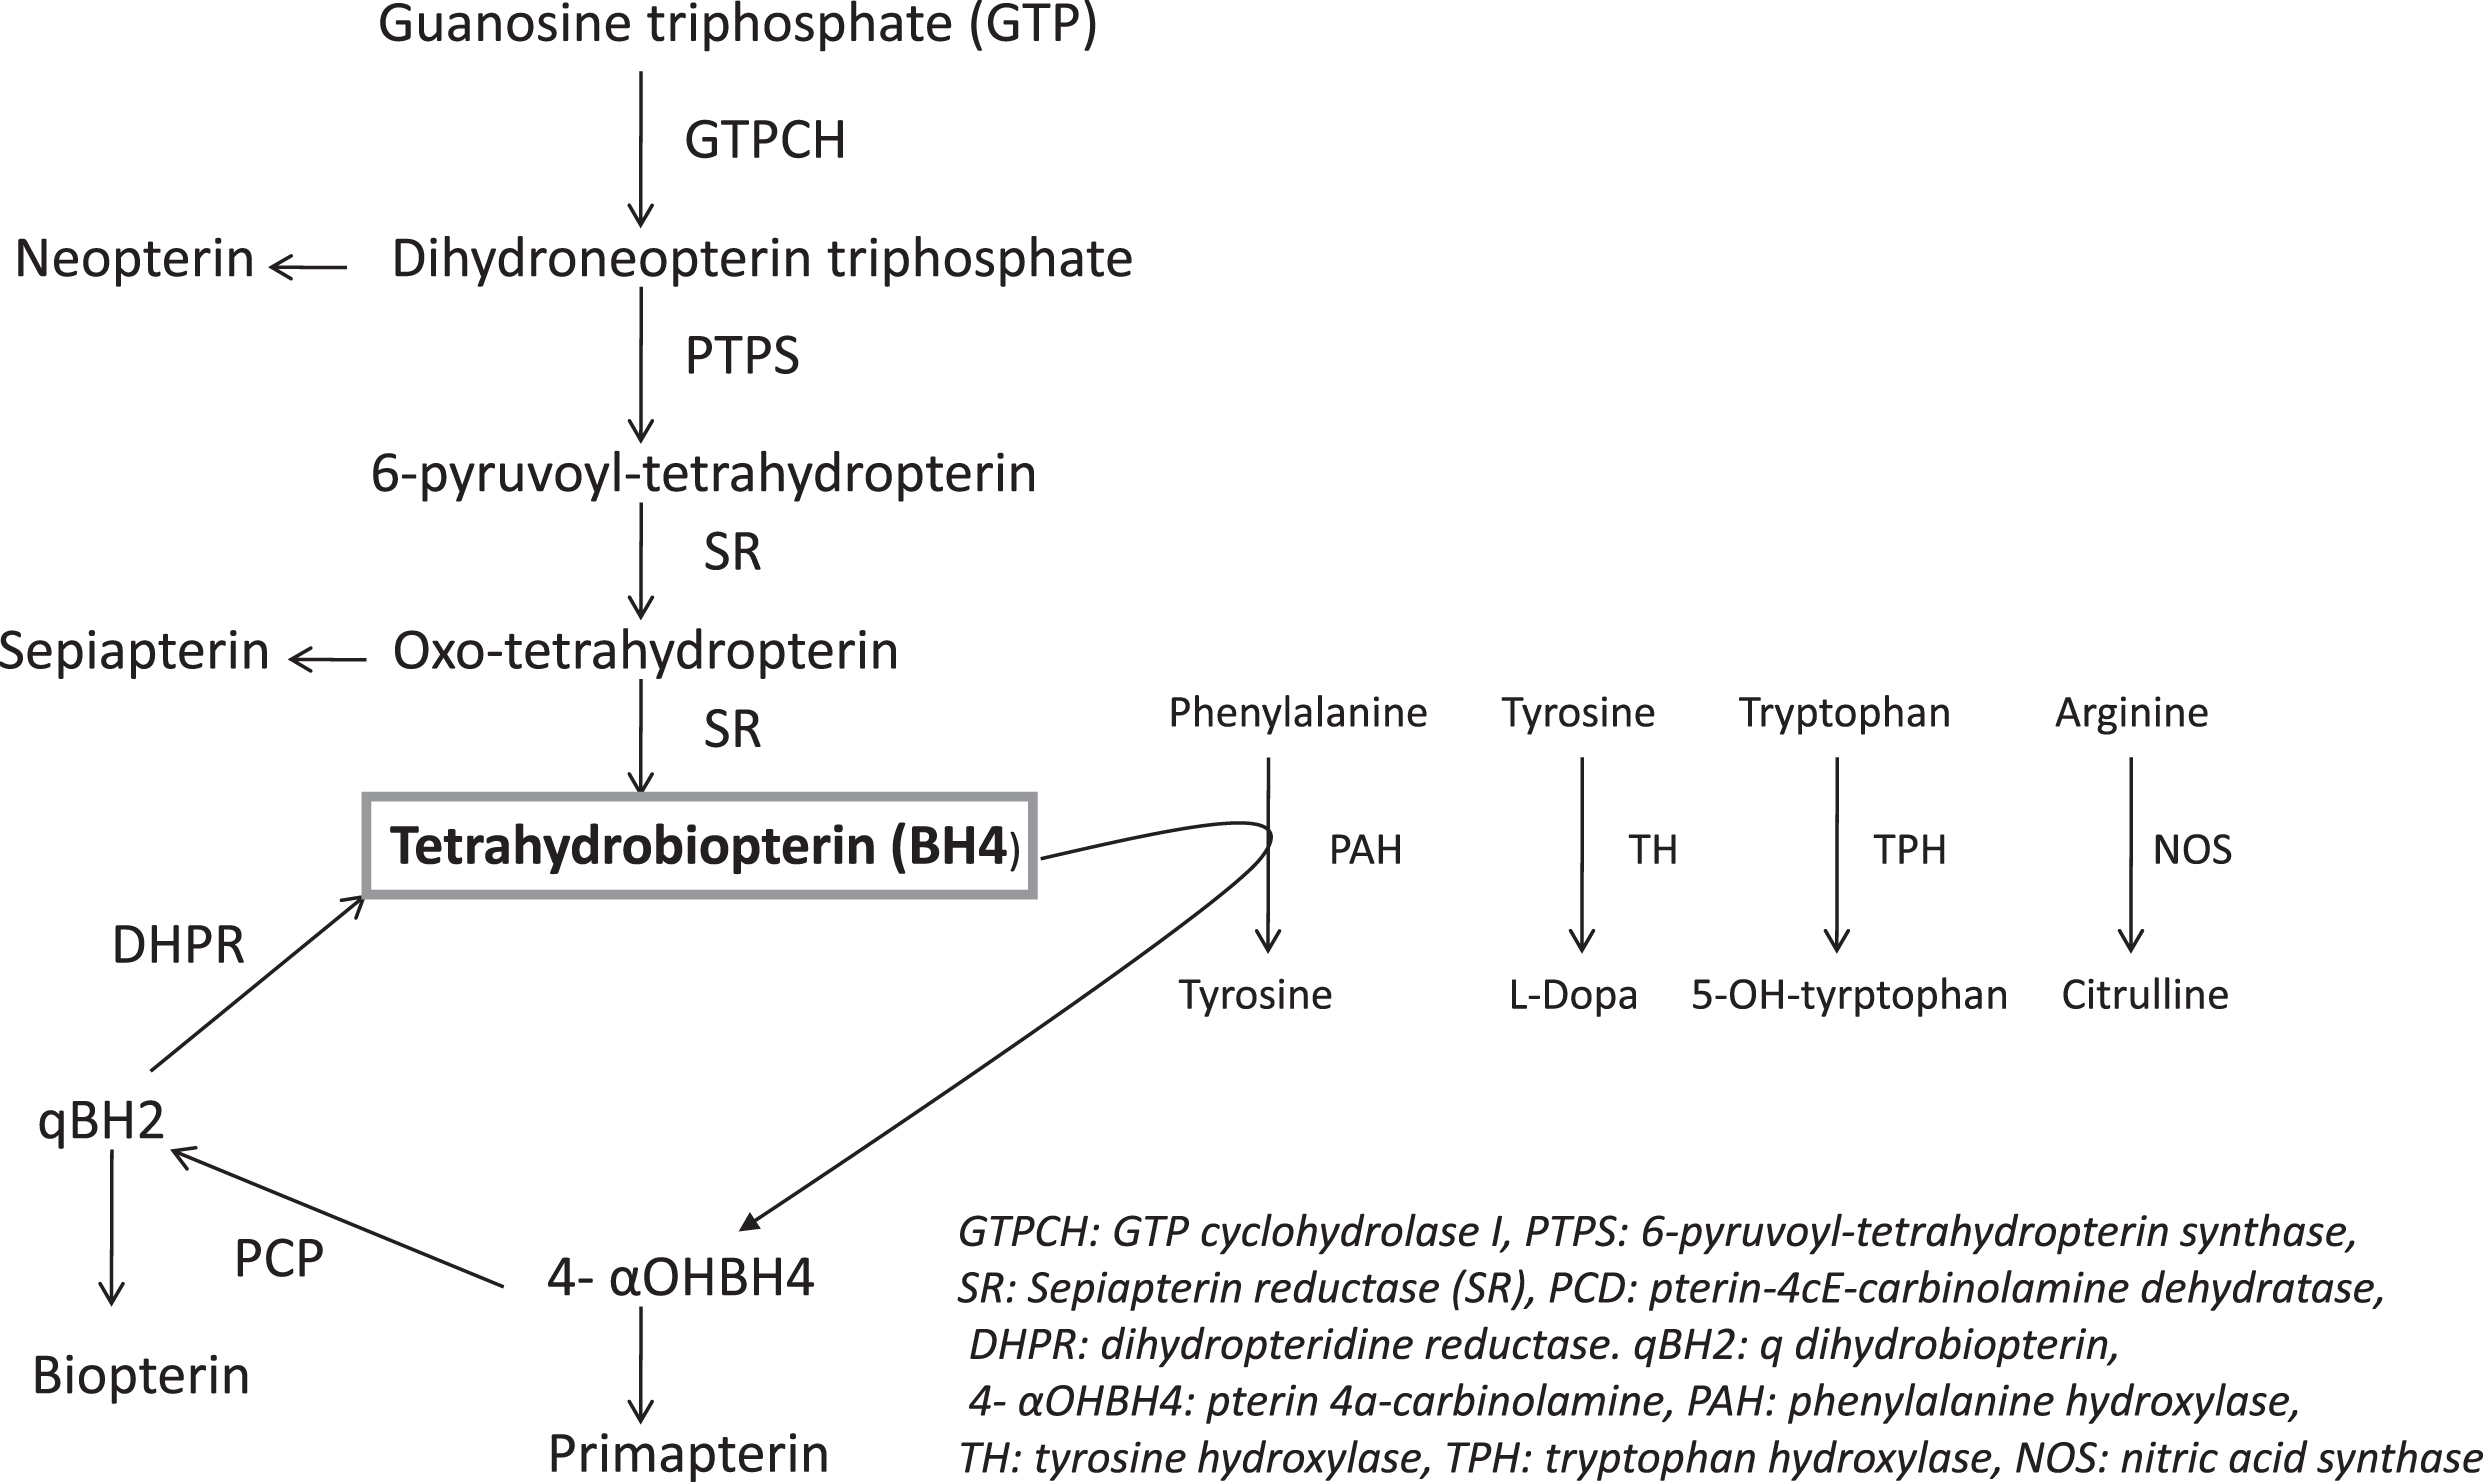 The Metabolic Pathway of Tetrahydrobiopterin (BH4).